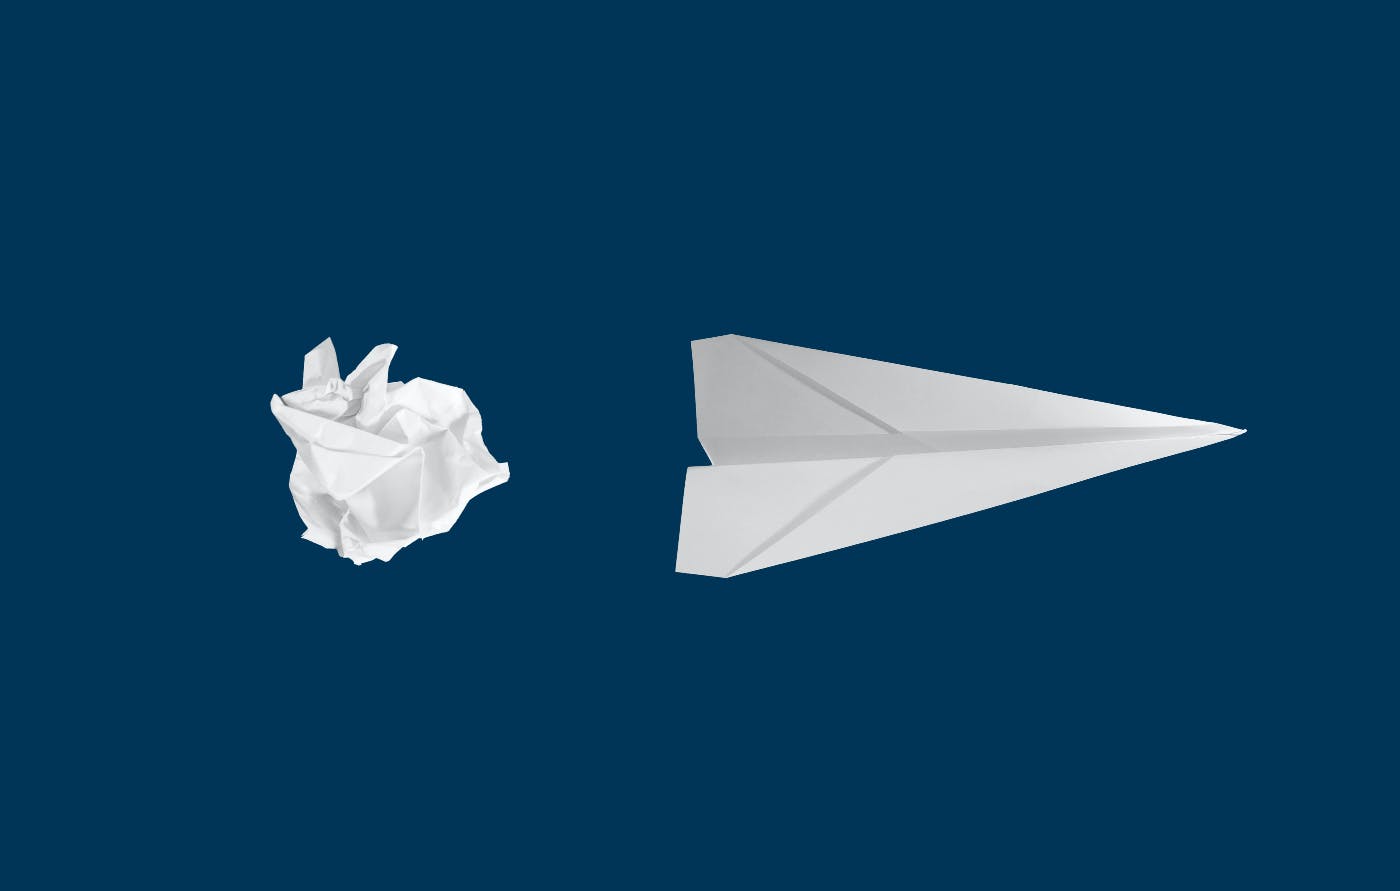 a crumpled piece of white paper next to a white paper airplane on a blue background